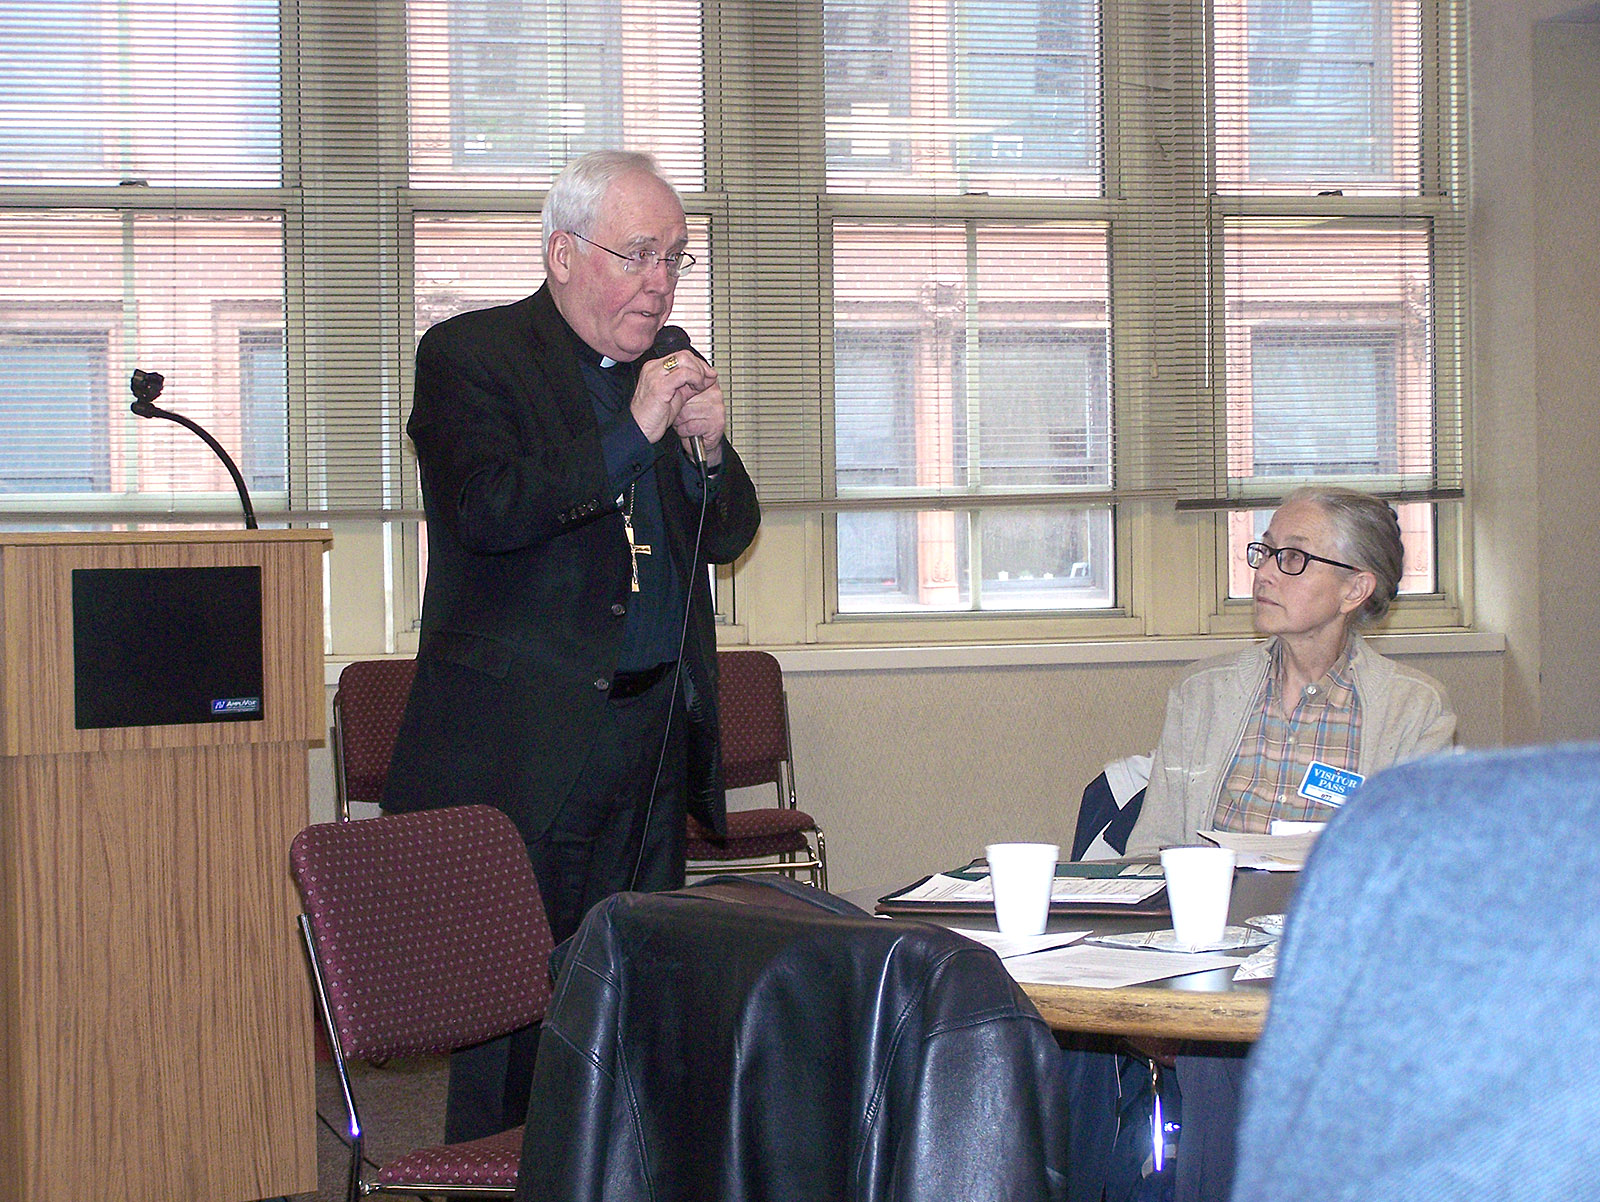 Bishop Richard J. Malone speaks to the members of the Diocesan Pastoral Council during a Dec. 1 meeting at the Catholic Center in downtown Buffalo. The meeting allowed the bishop to address the concerns of the diverse regions of the diocese.  Listening to the bishop is council member Elizabeth Schachtner.
(Patrick J. Buechi/Staff)